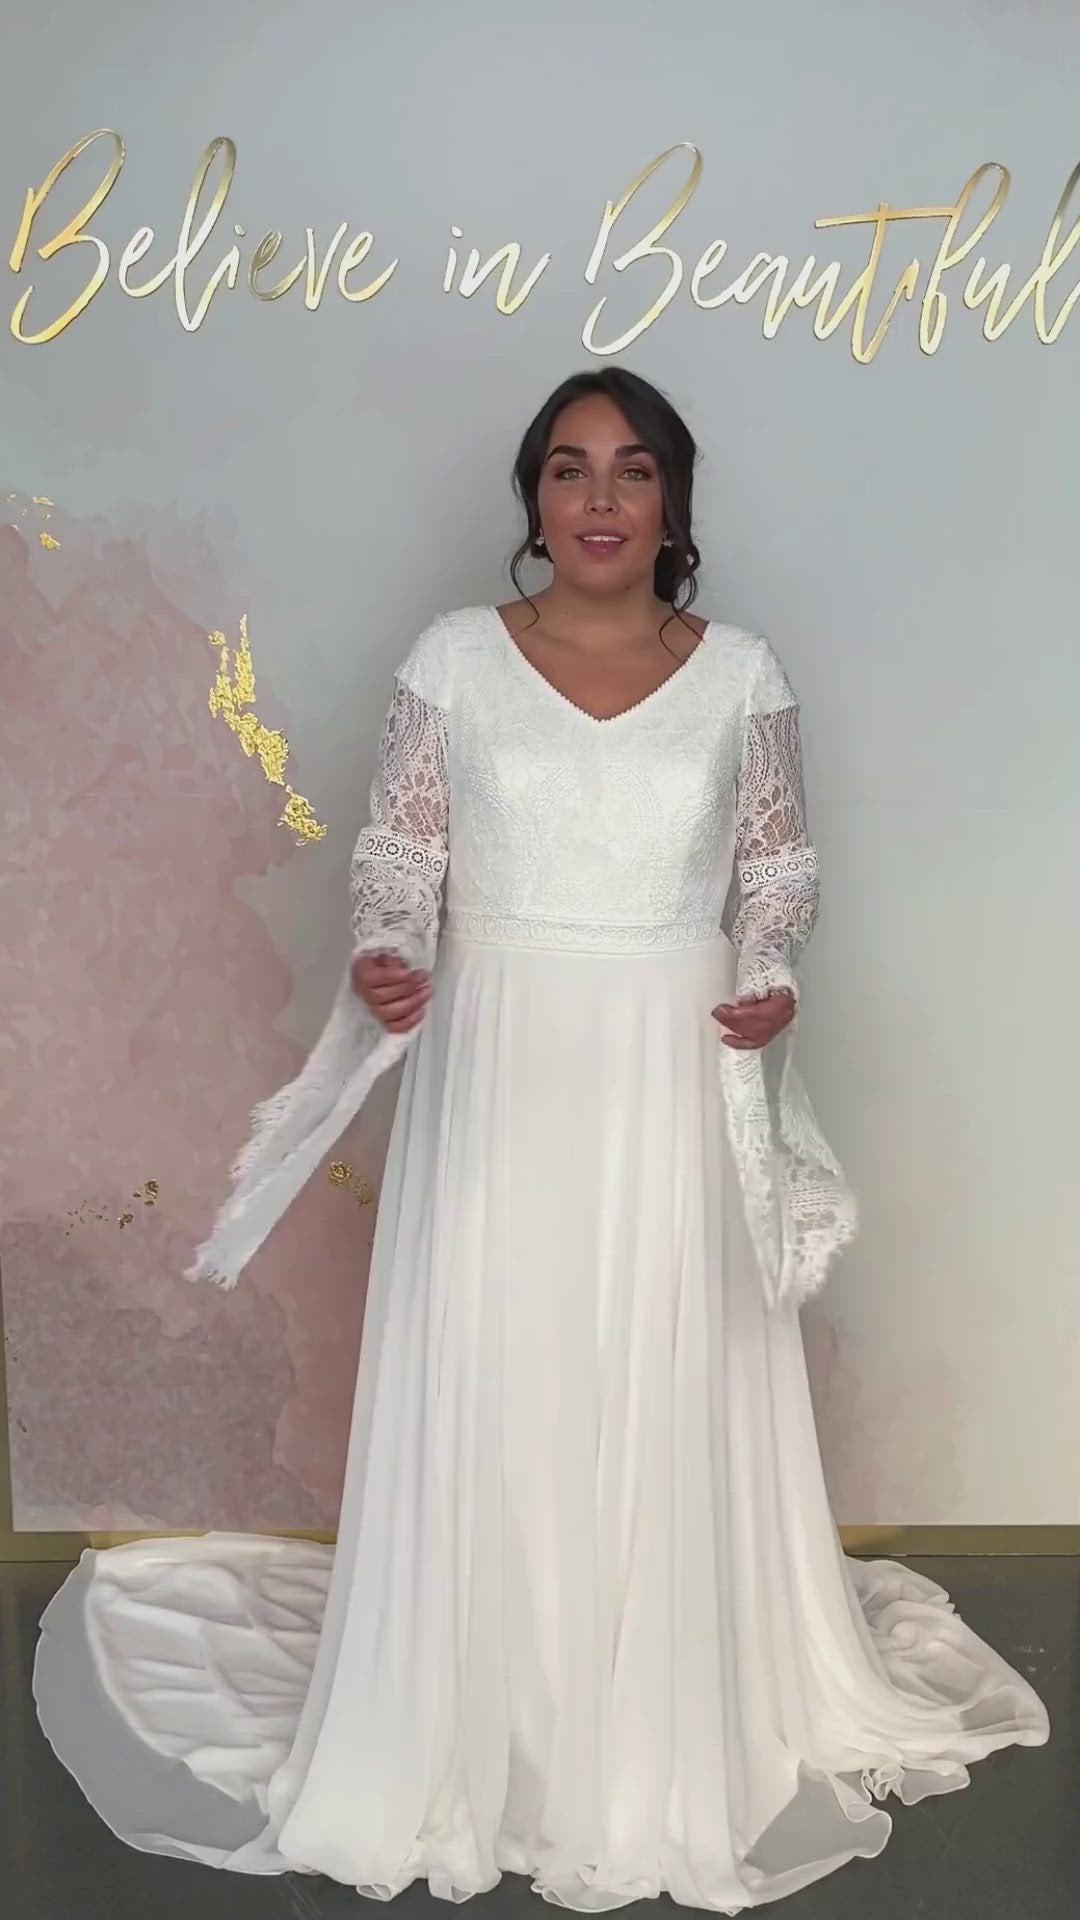 A video featuring our Merida wedding dress and its billowing lace bell sleeves, and flowy chiffon A-line skirt.